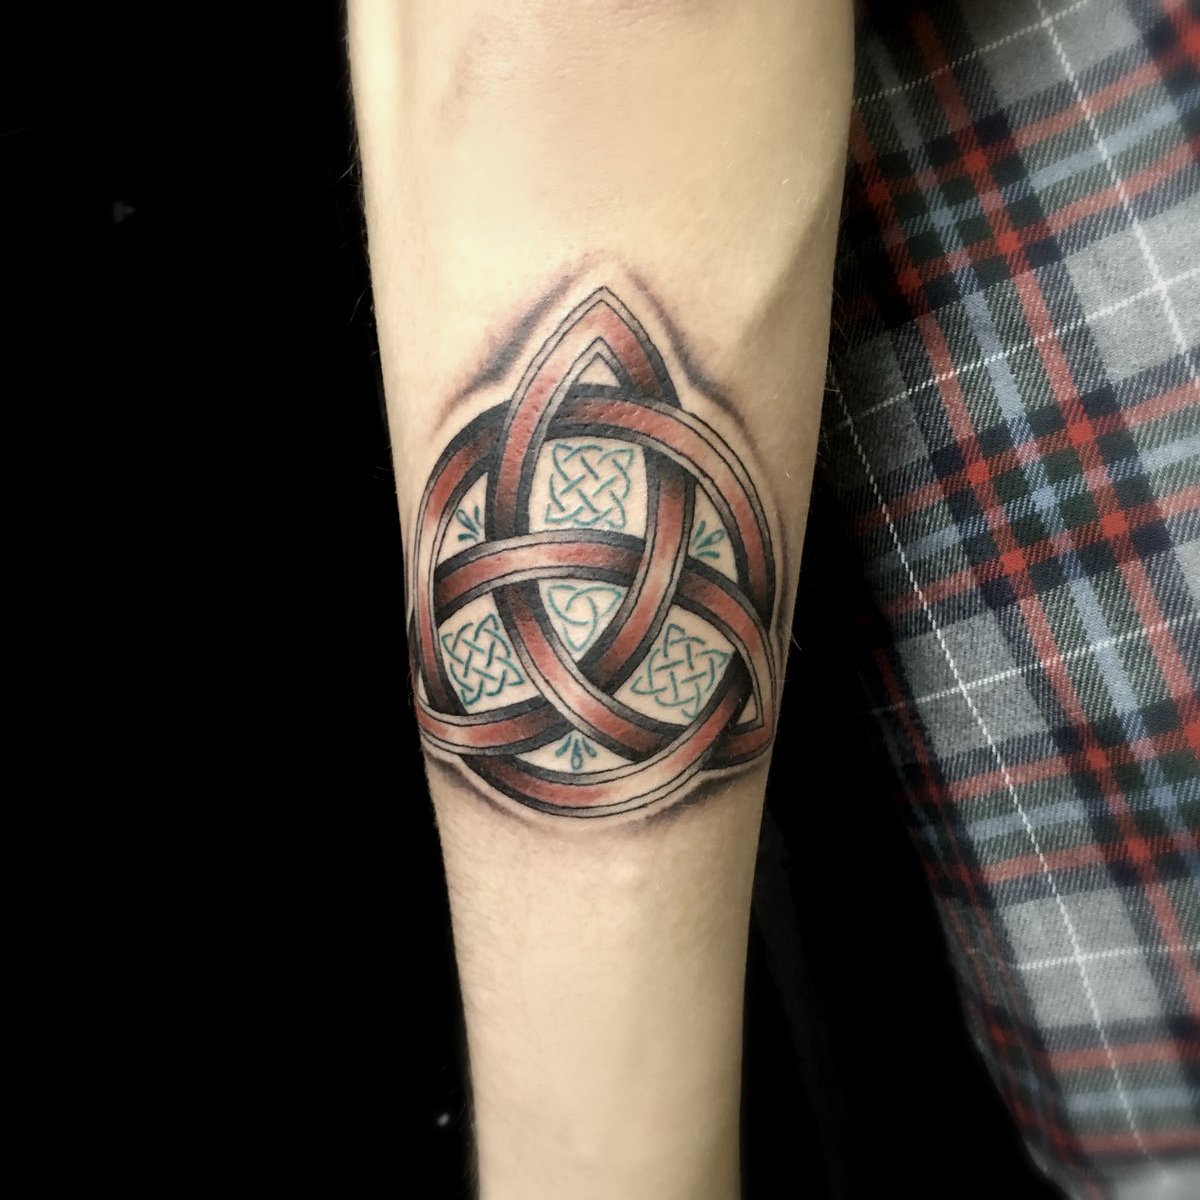 Blackhattattoodublin Celtic Tattoo By J Kennedy Tattoo The Season Has Started With St Patrick And We Are Still Getting Thoses Beauties To Tattoo Great Job There Celticknottattoo Celtictattoo Blackhatdublin Dublintattoo T Co